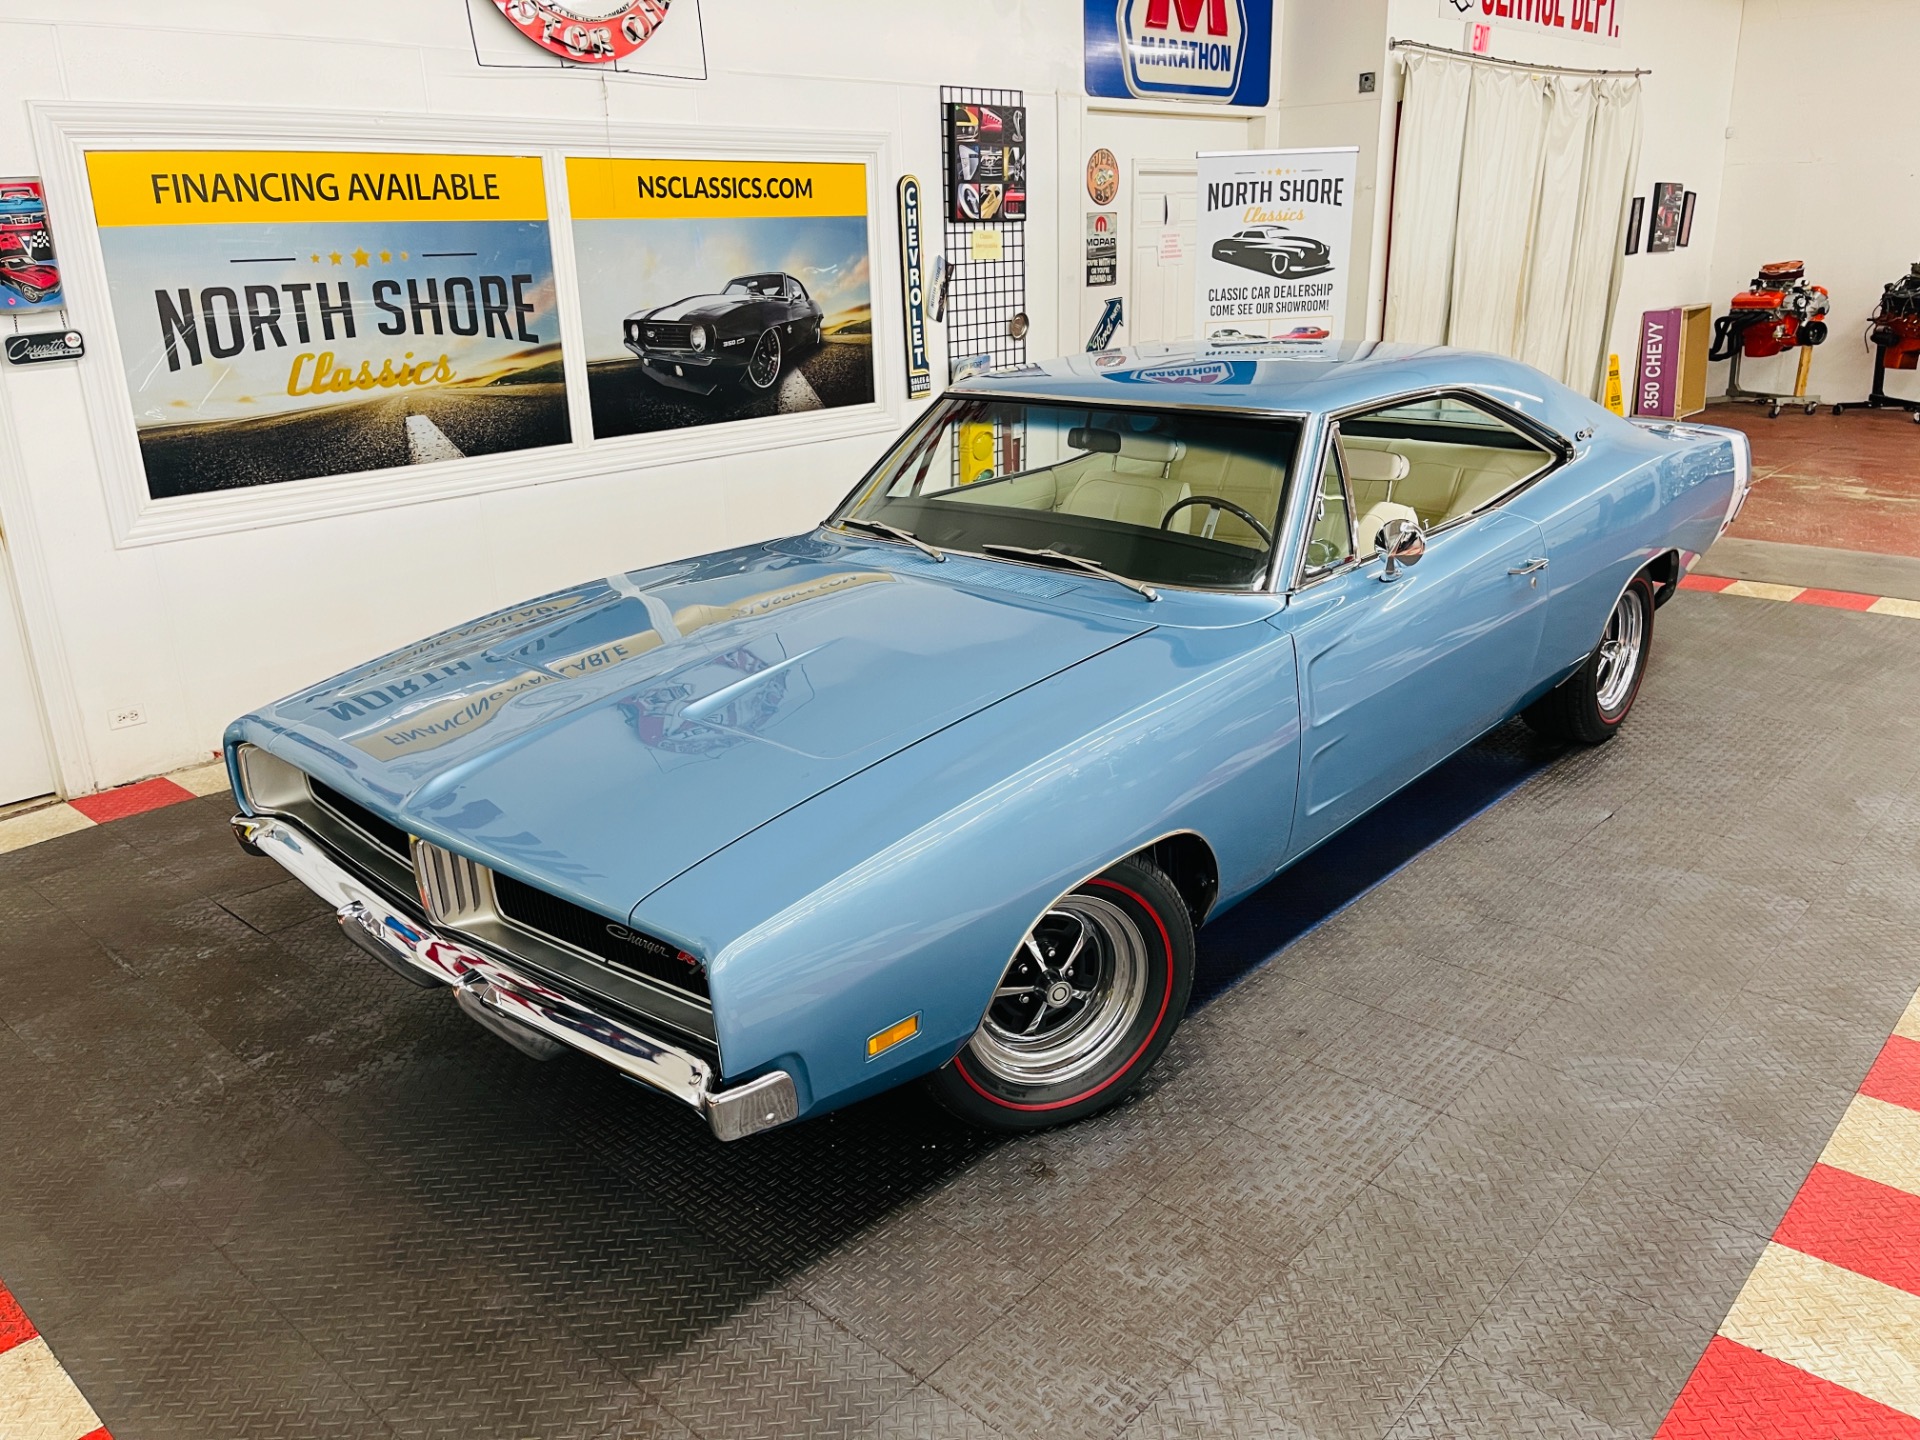 Used 1969 Dodge Charger - R/T - 440 MAGNUM - 4 SPEED TRANS - B3 BLUE - SEE  VIDEO For Sale (Sold) | North Shore Classics Stock #69107KFCVO